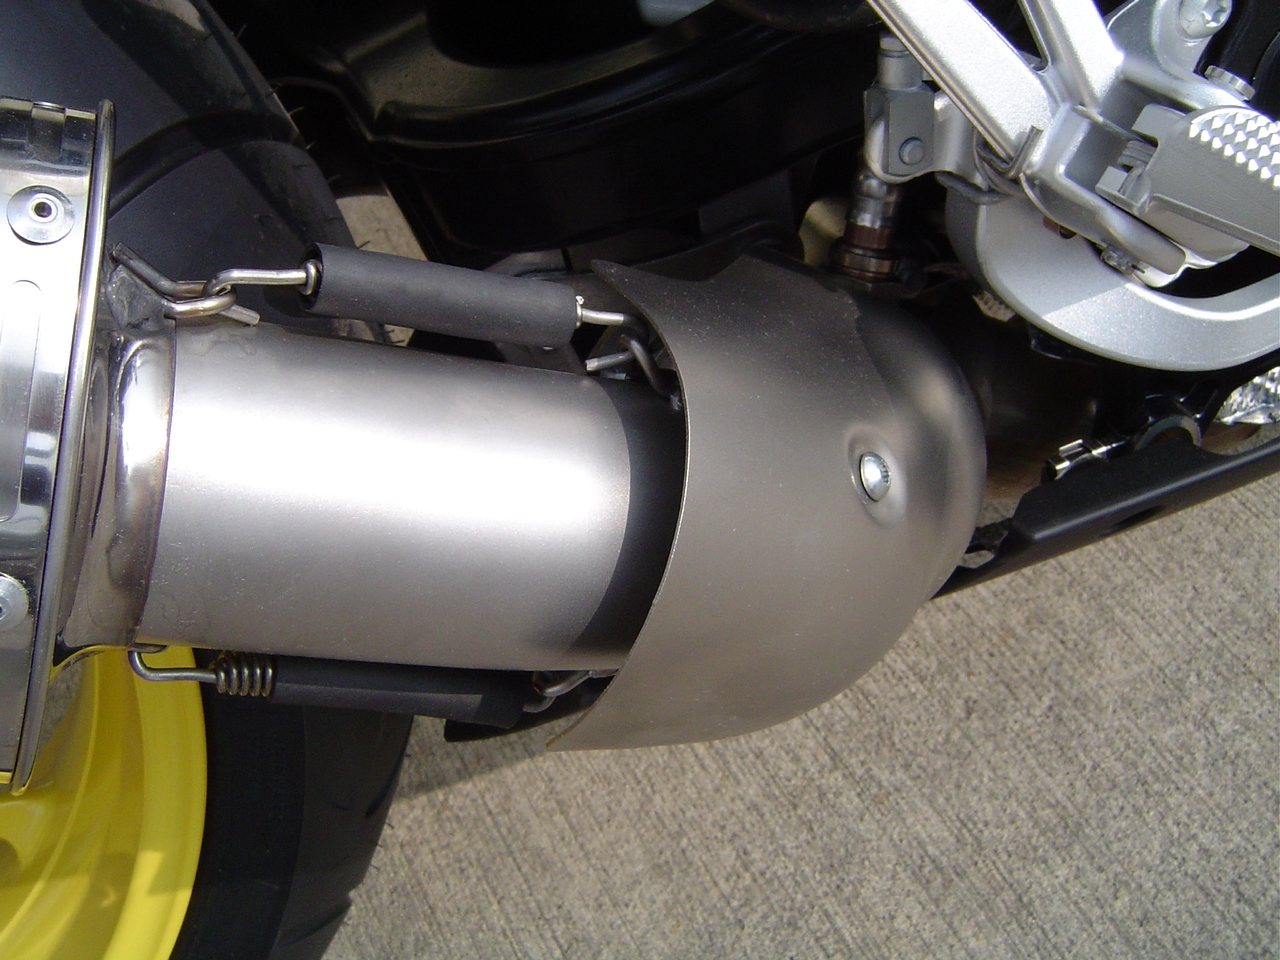 Exhaust system compatible with Bmw K 1200 Gt 2006-2008, Albus Ceramic, Homologated legal slip-on exhaust including removable db killer and link pipe 